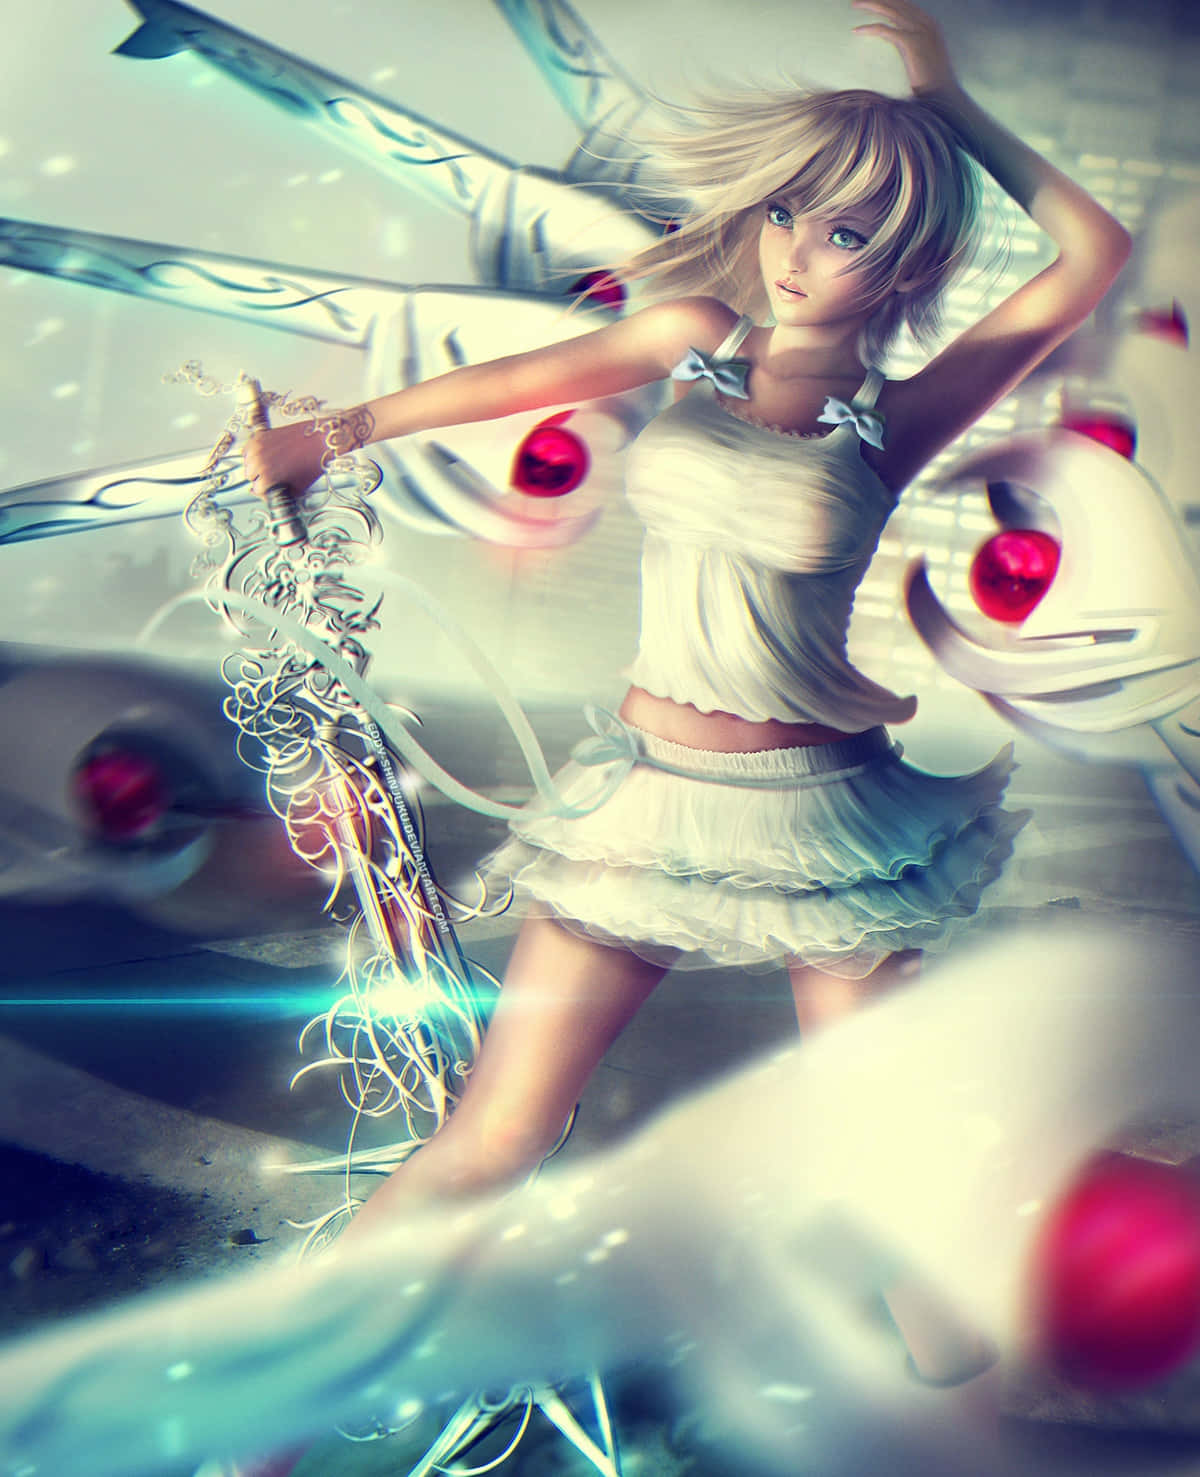 Namine from Kingdom Hearts with a magical paintbrush Wallpaper